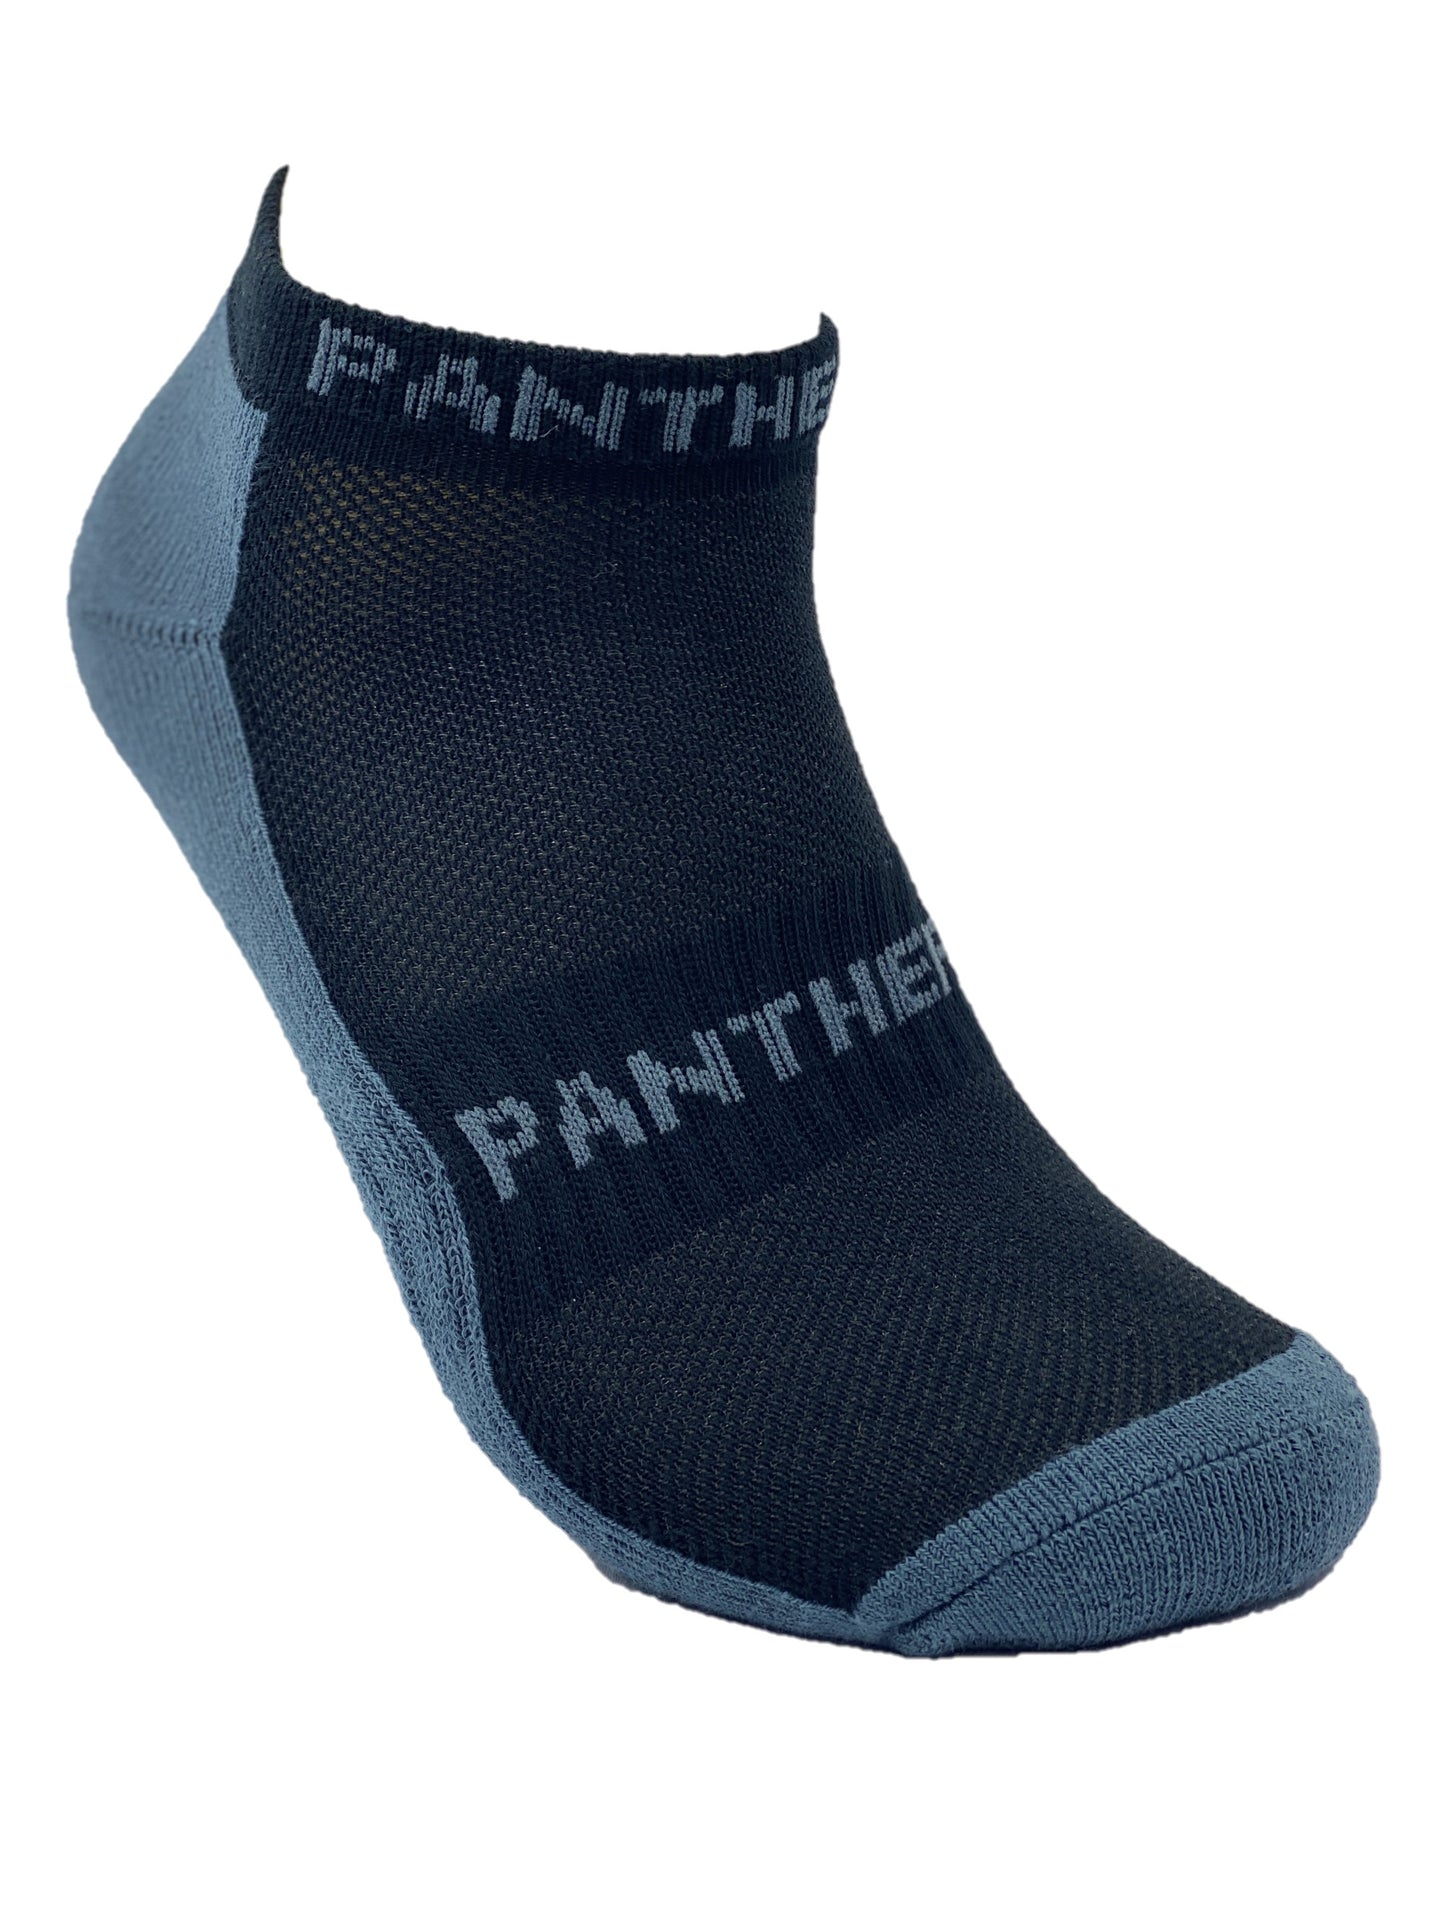 Panthers Sport Ankle Socks (2 Pack)